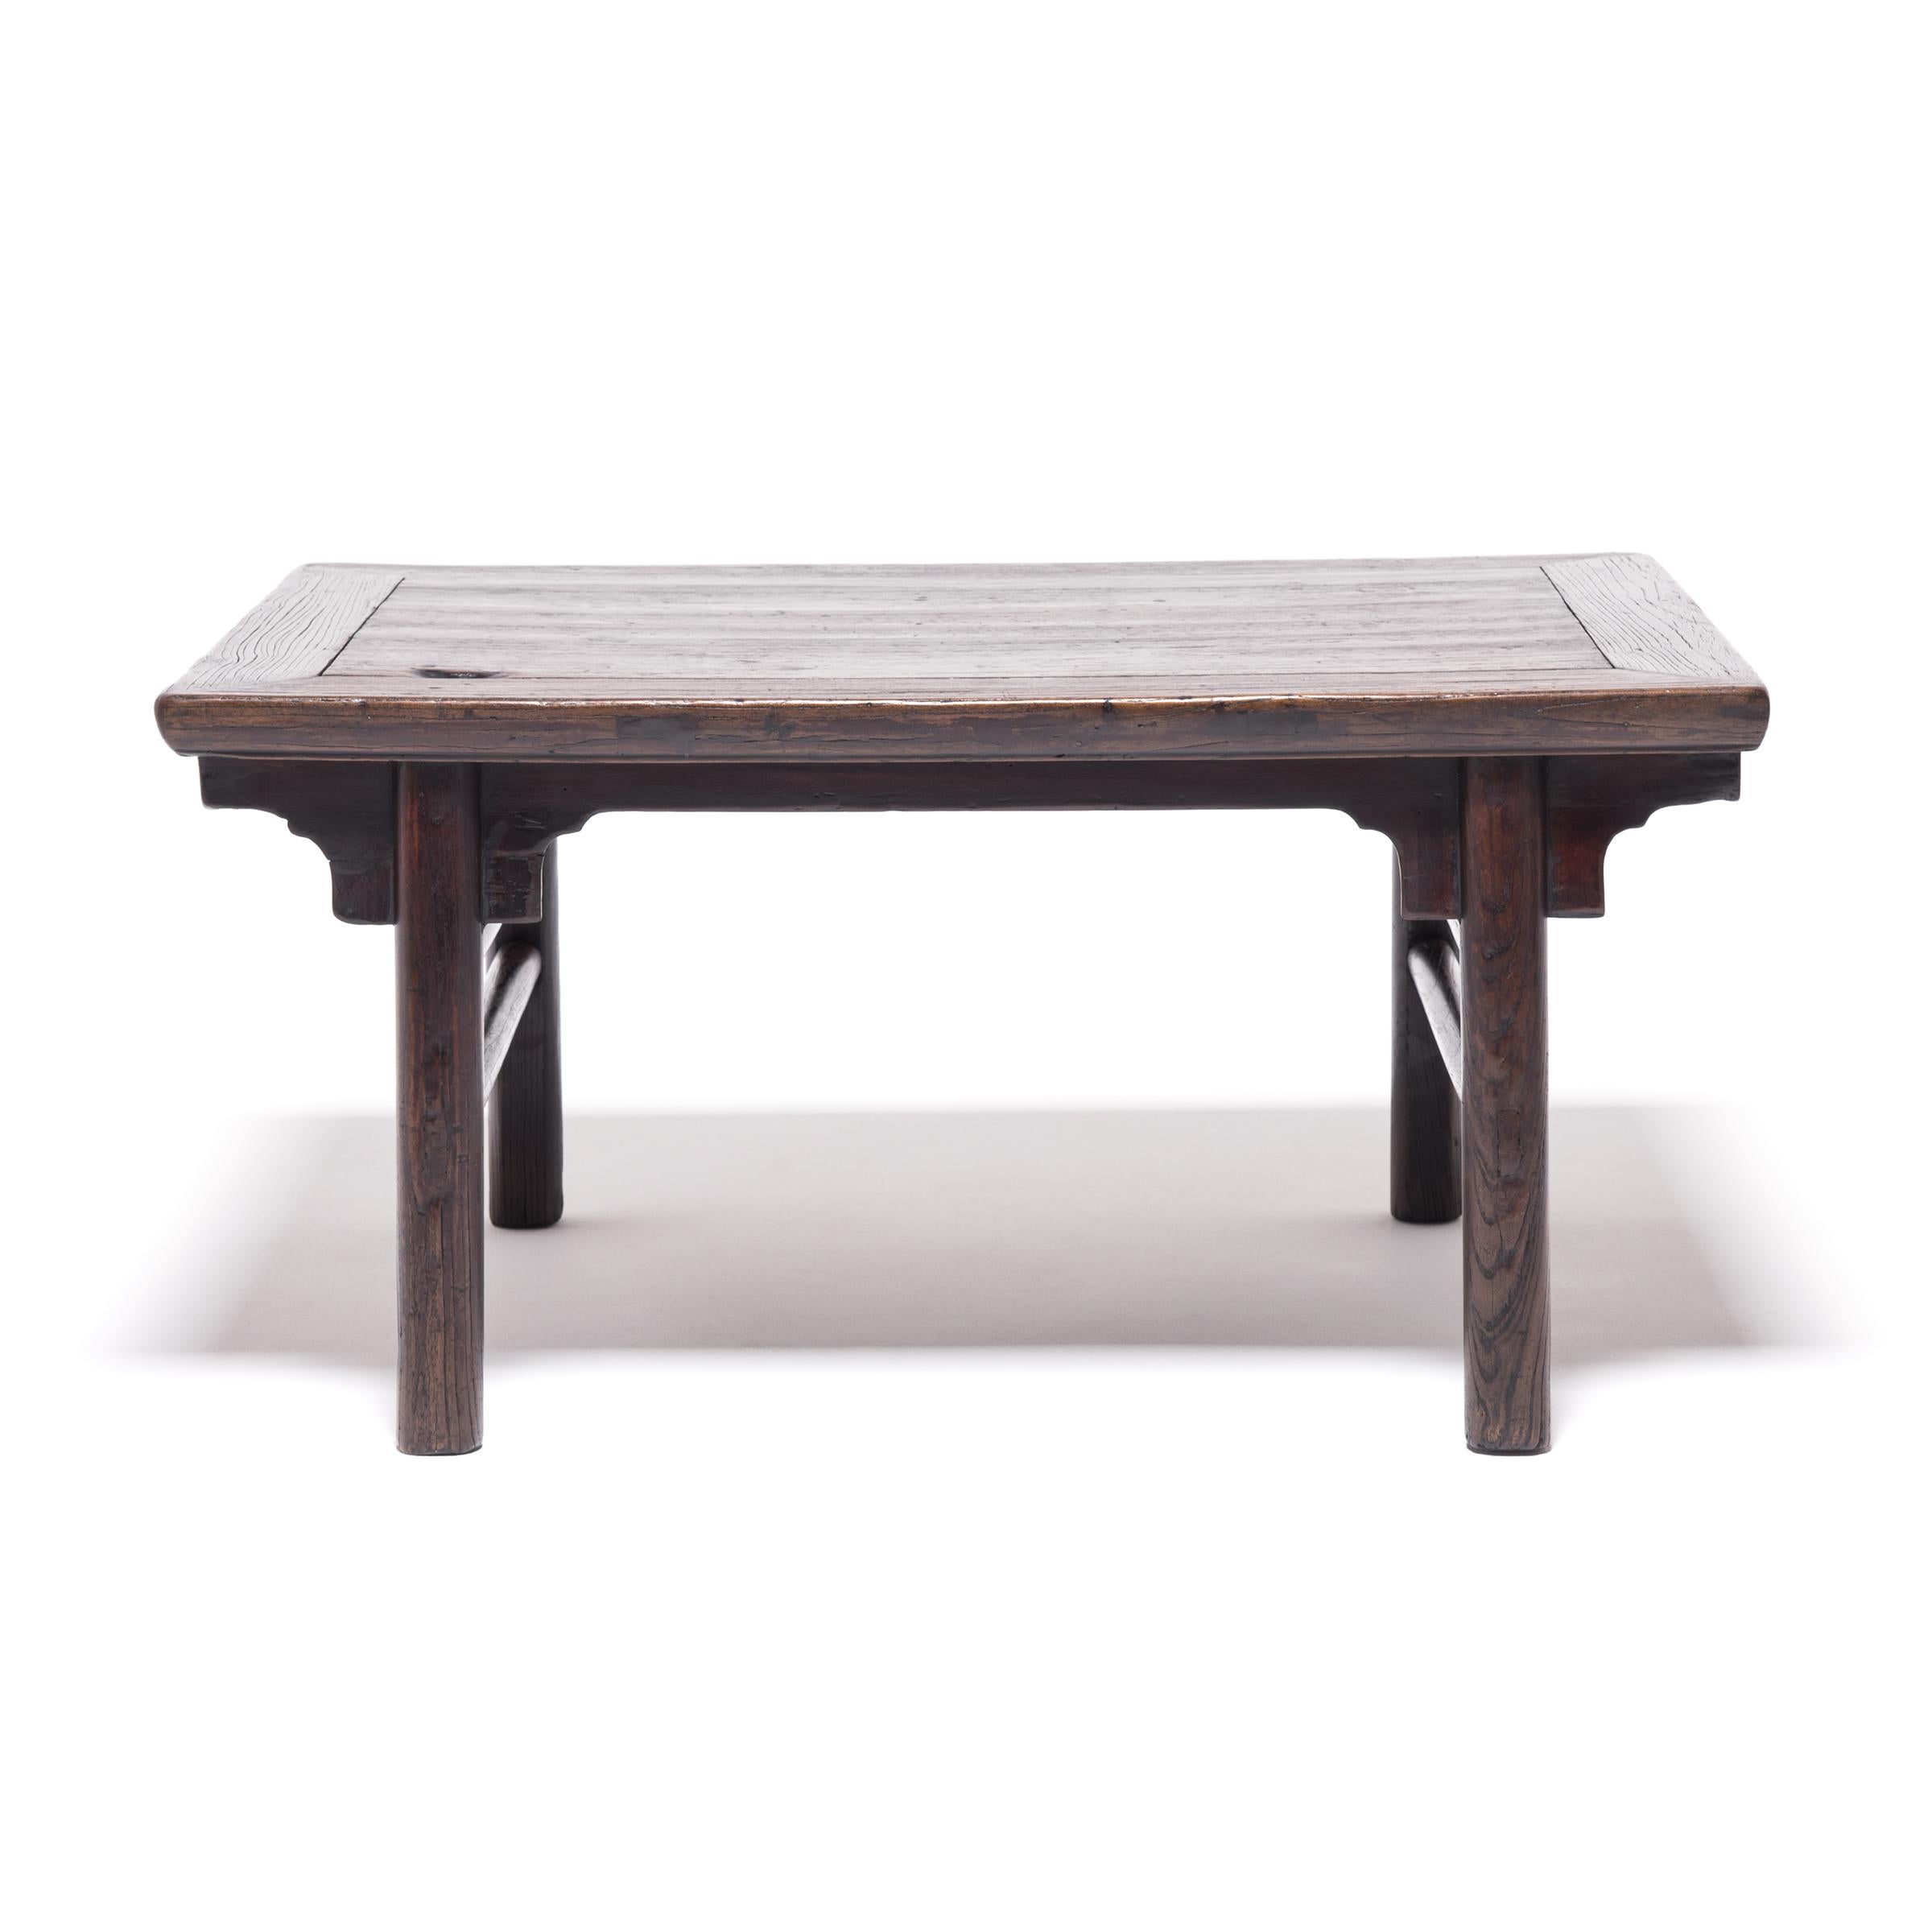 Pair of Chinese Low Inset Leg Tables, c. 1850 In Good Condition For Sale In Chicago, IL